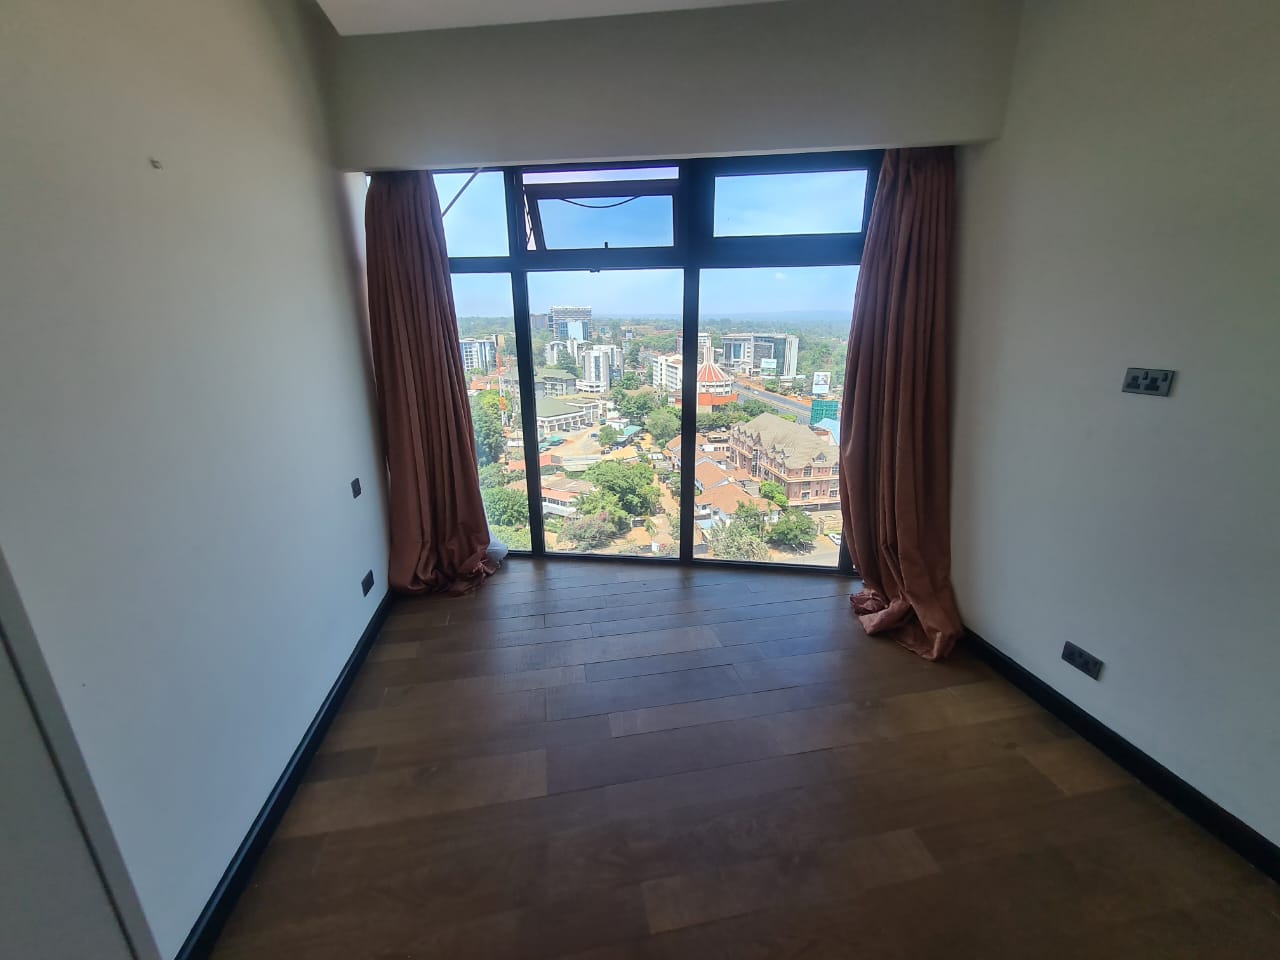 1 and Two Bedroom Unfurnished Apartments for Rent in Westlands with great views for rent at Ksh90kMonth and 120kmonth respectively (10)